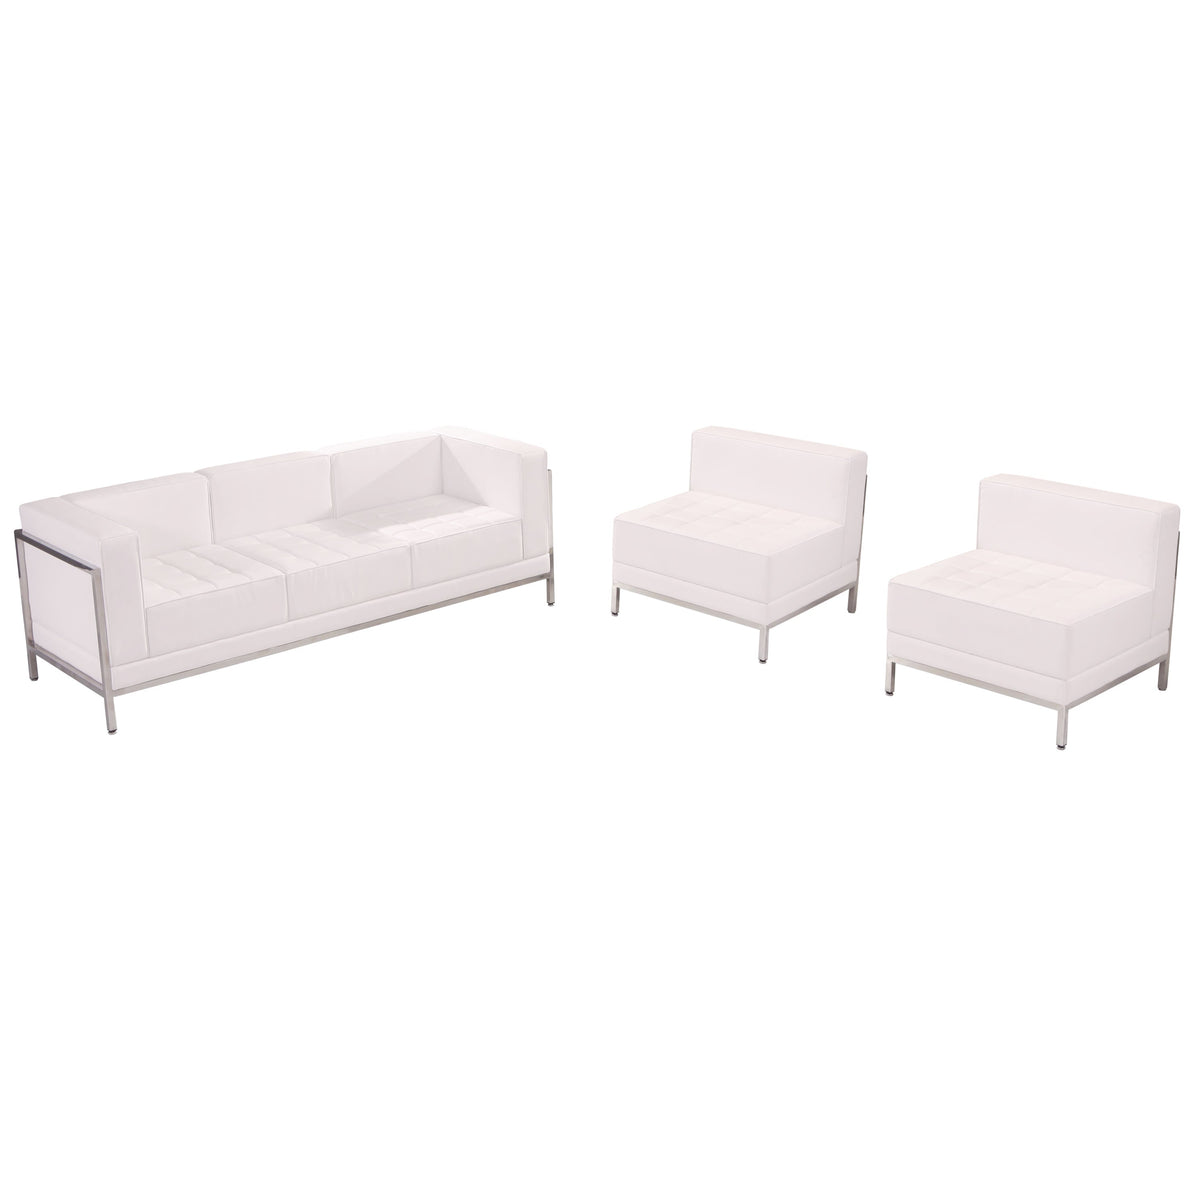 Melrose White |#| White LeatherSoft Modular Sofa & Chair Set with Taut Back and Seat